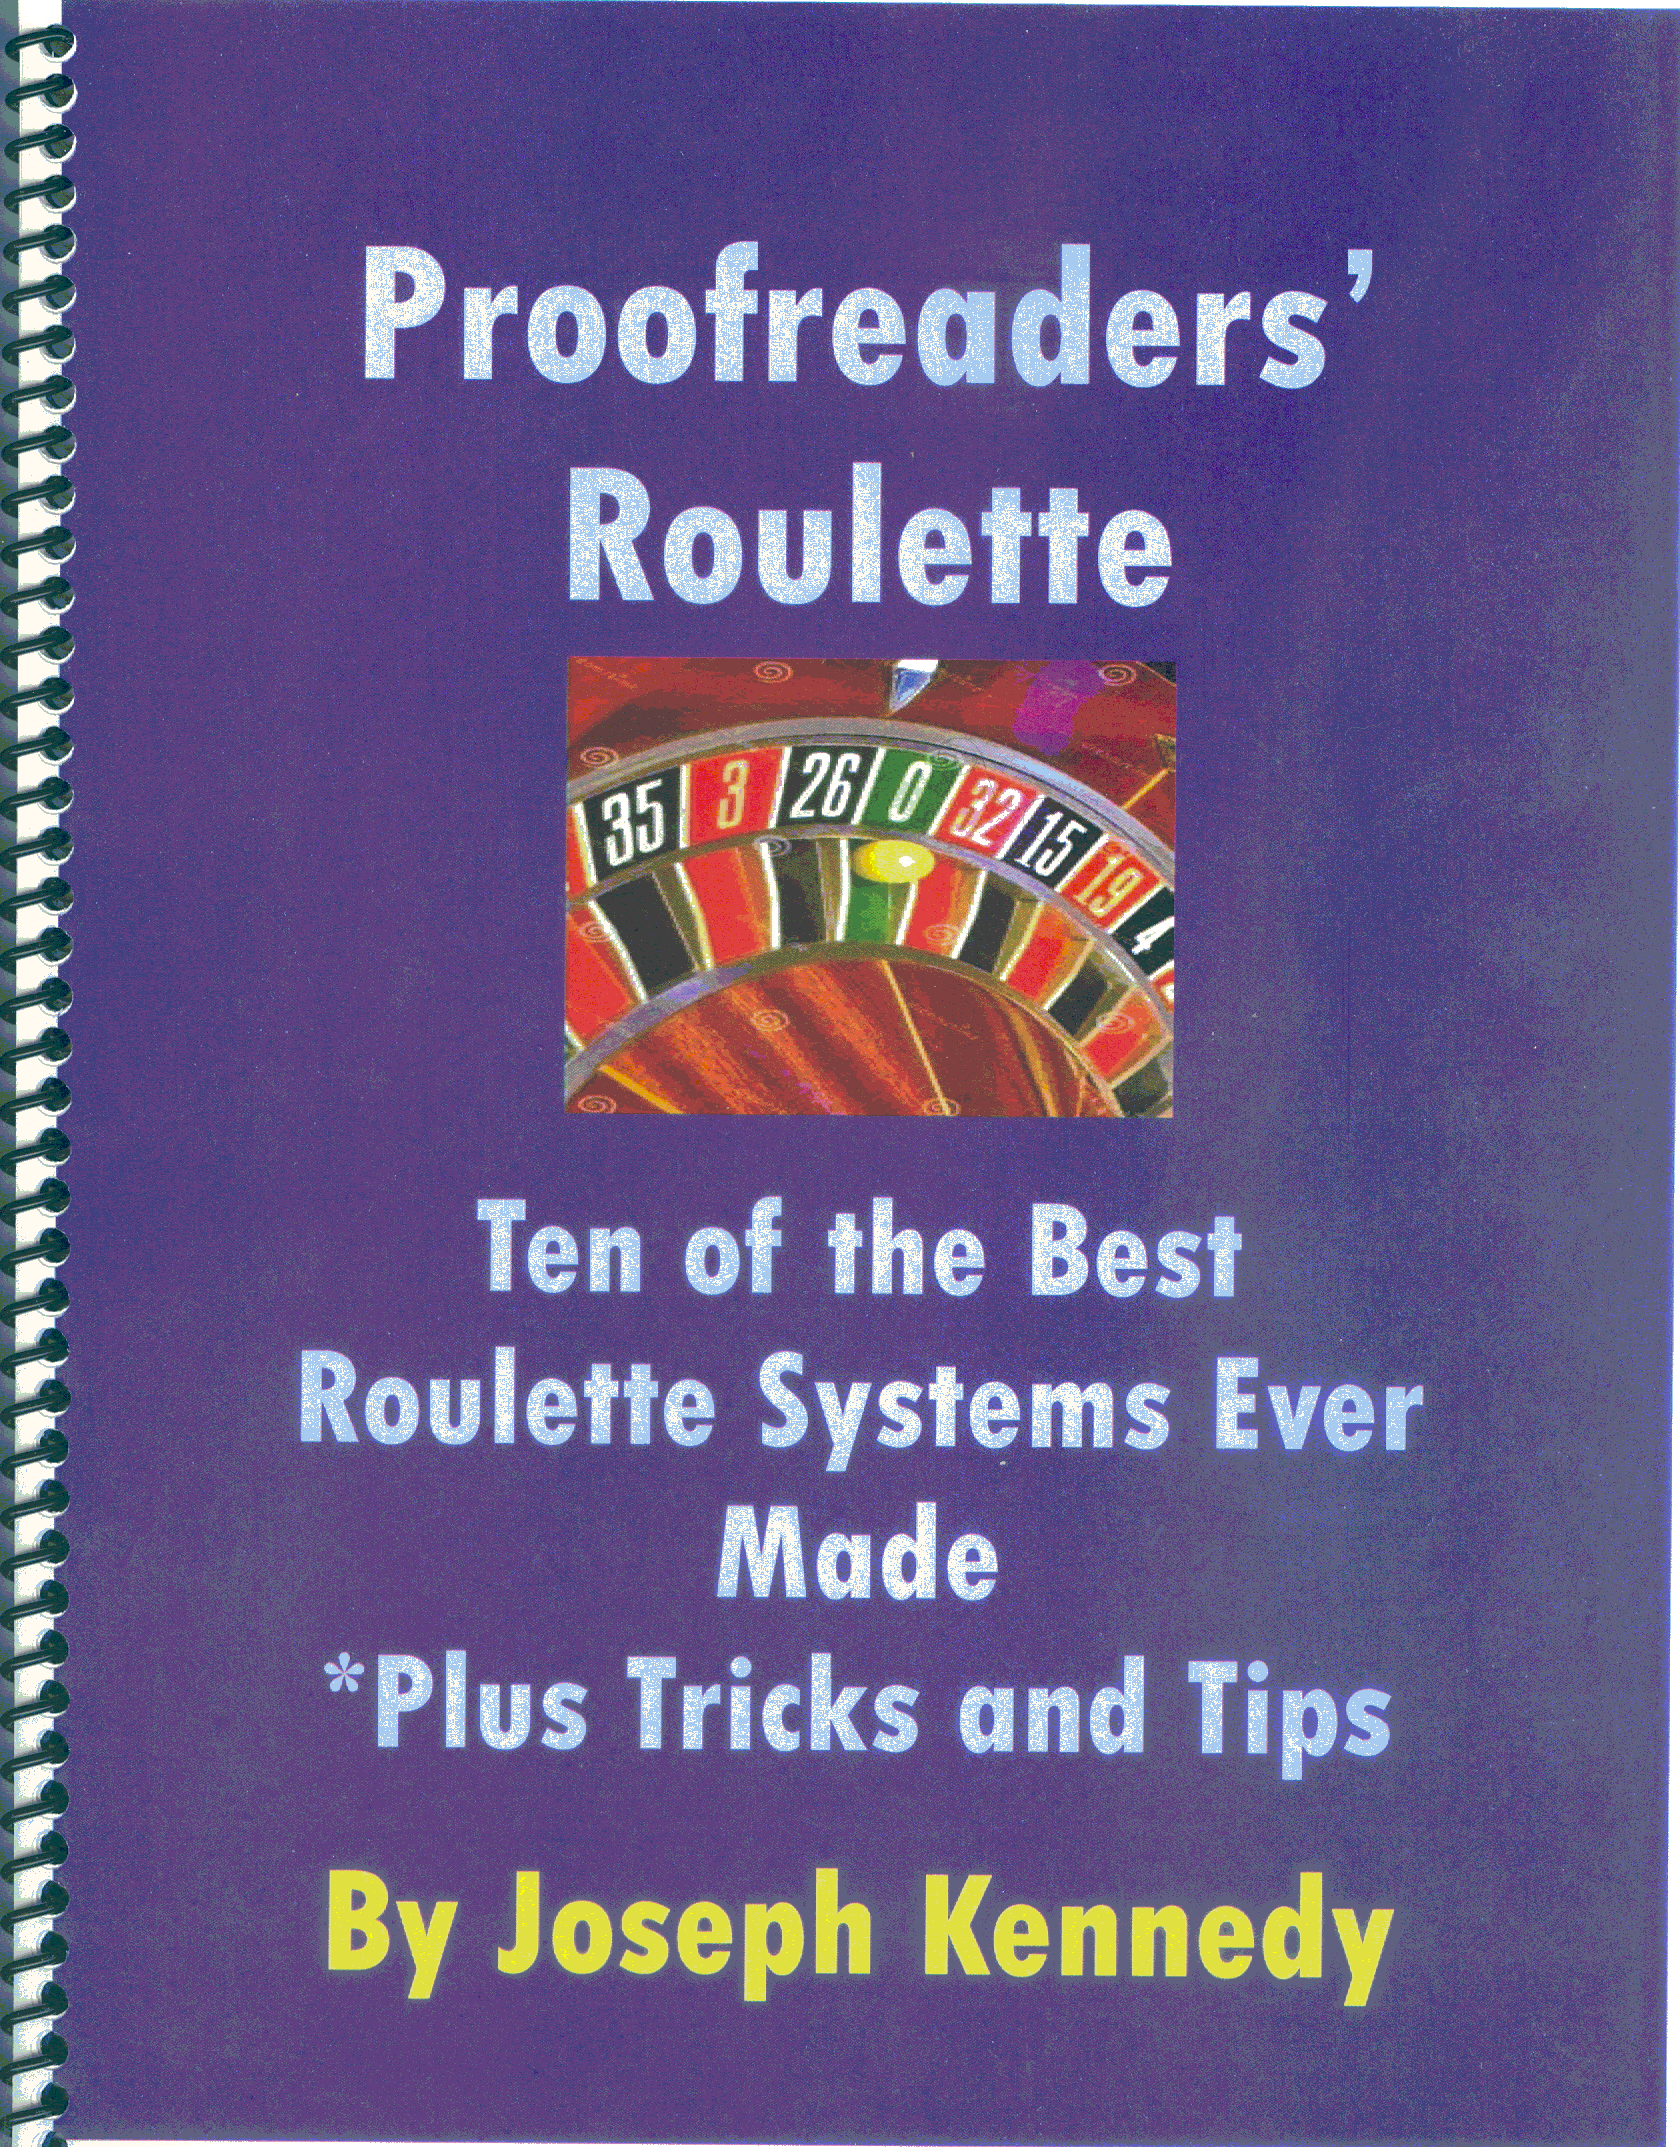 Proofreaders' Roulette.PNG